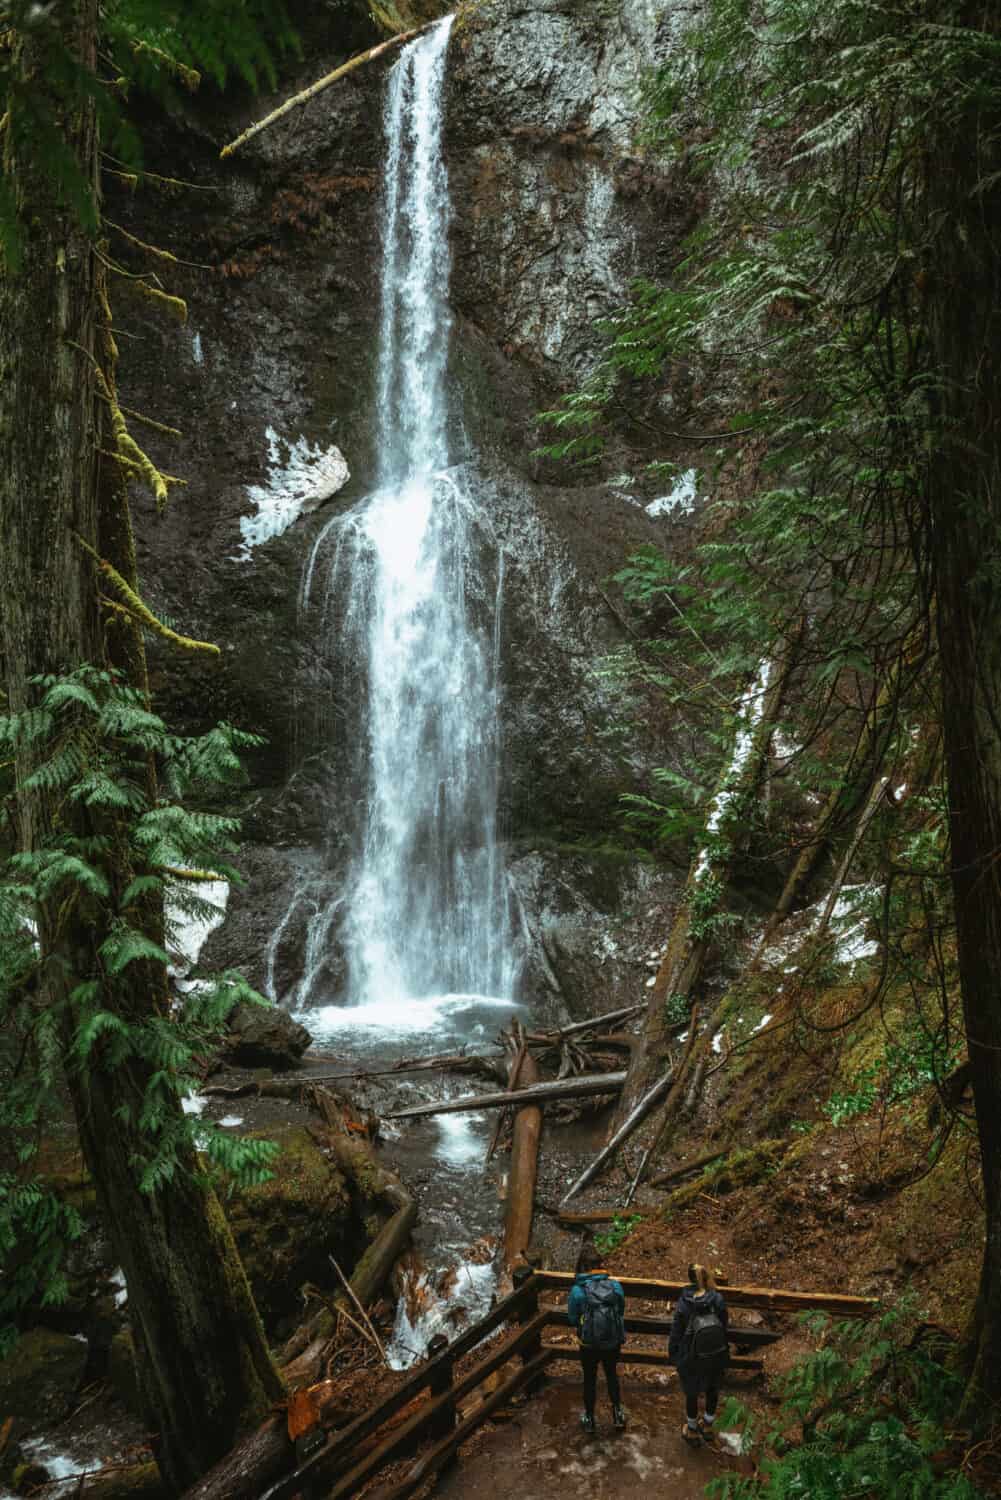 Facts About Olympic National Park - Marymere Falls